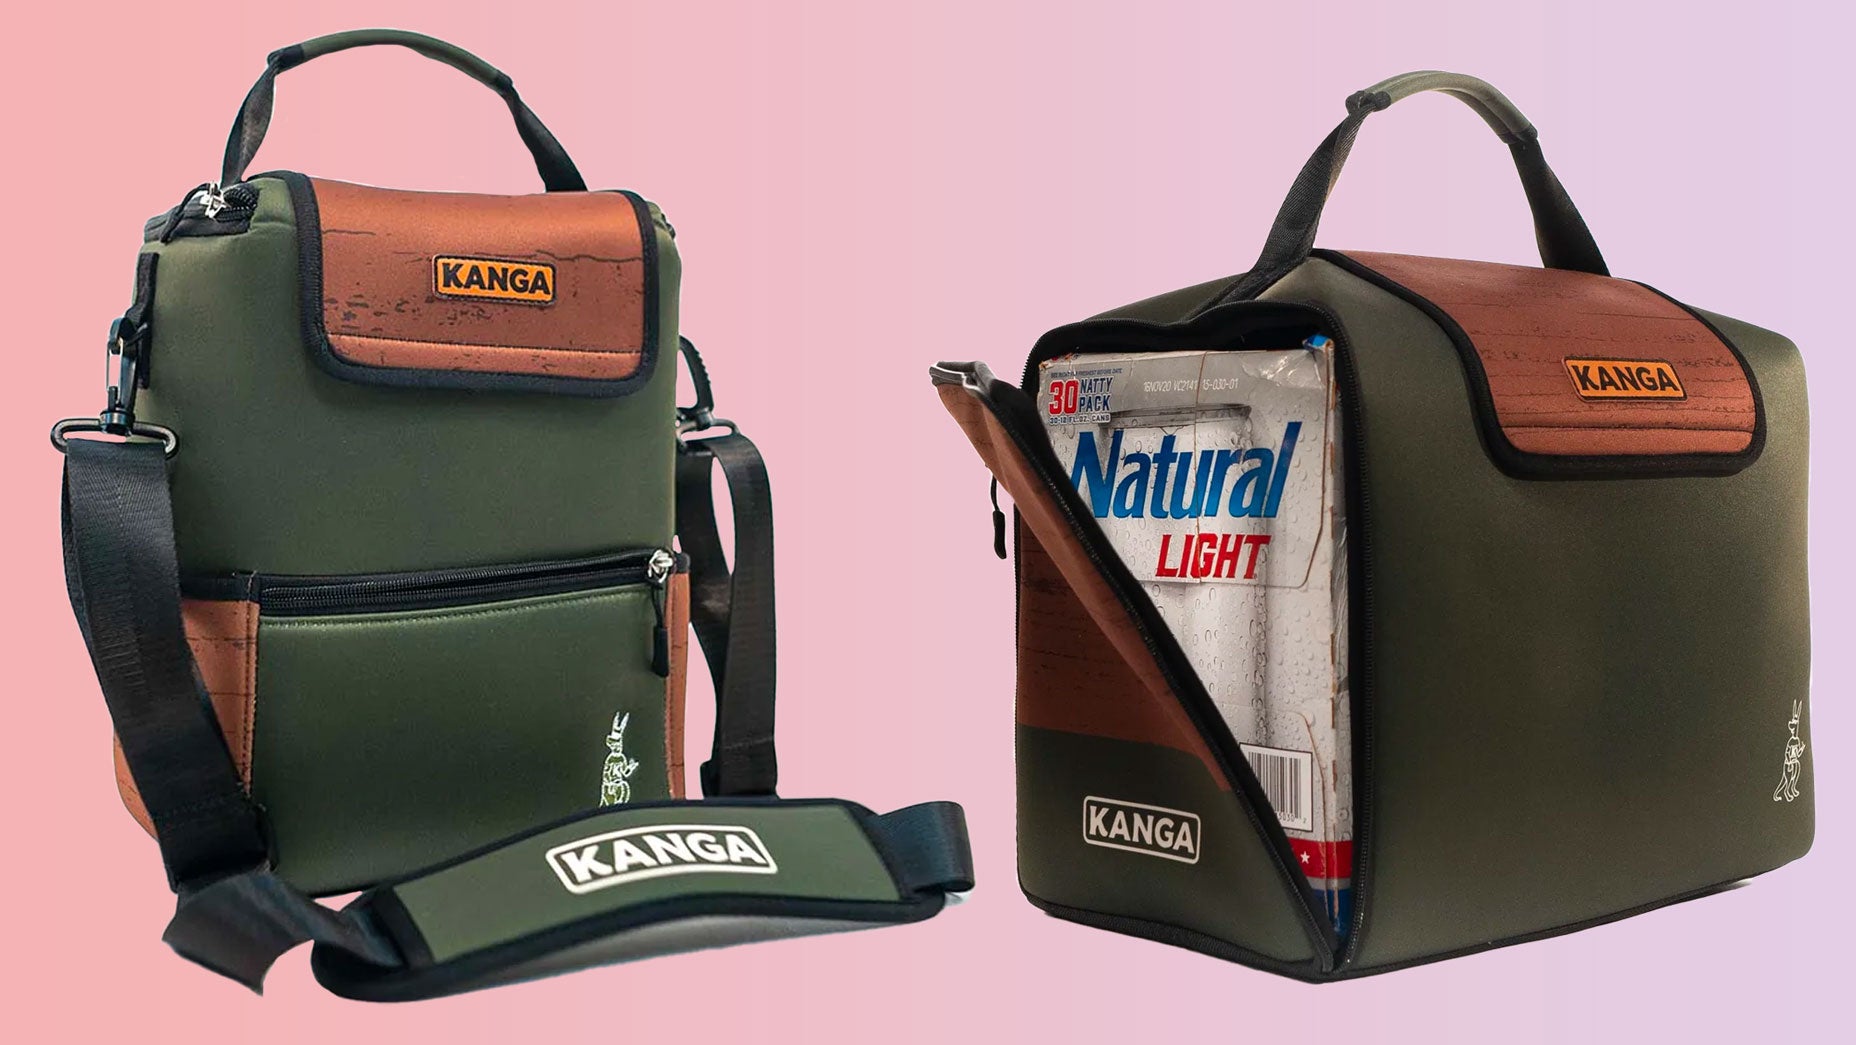 These simple, lightweight coolers will keep your beverages cold